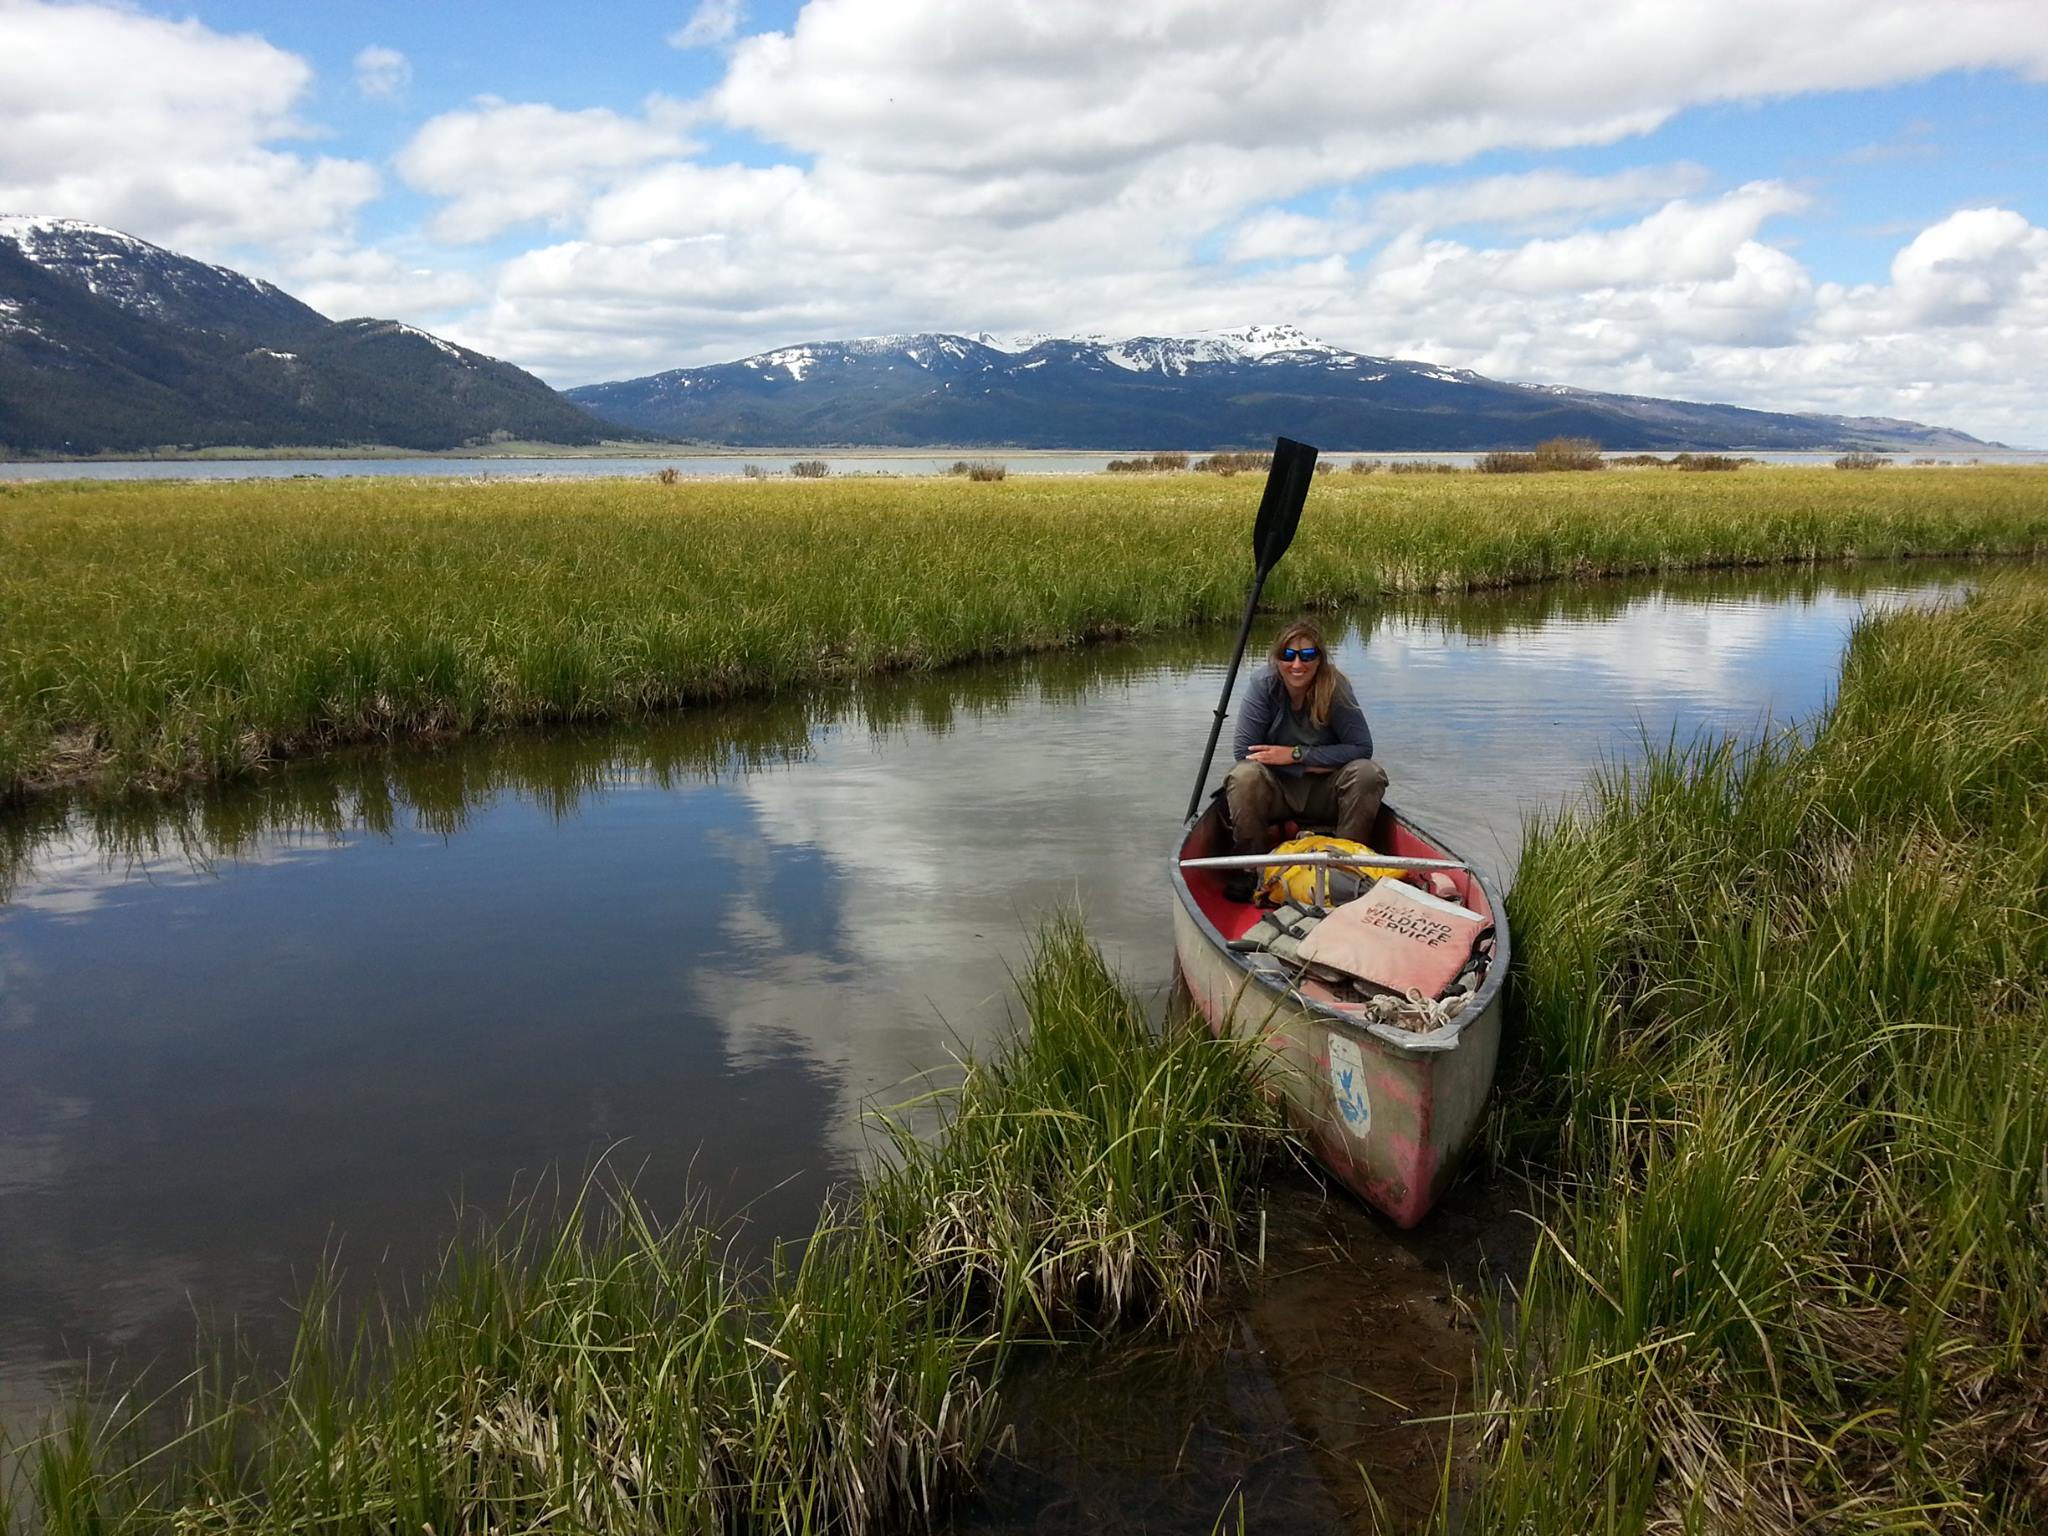 Kristen in a canoe on a small river with snowcapped mountains in the background